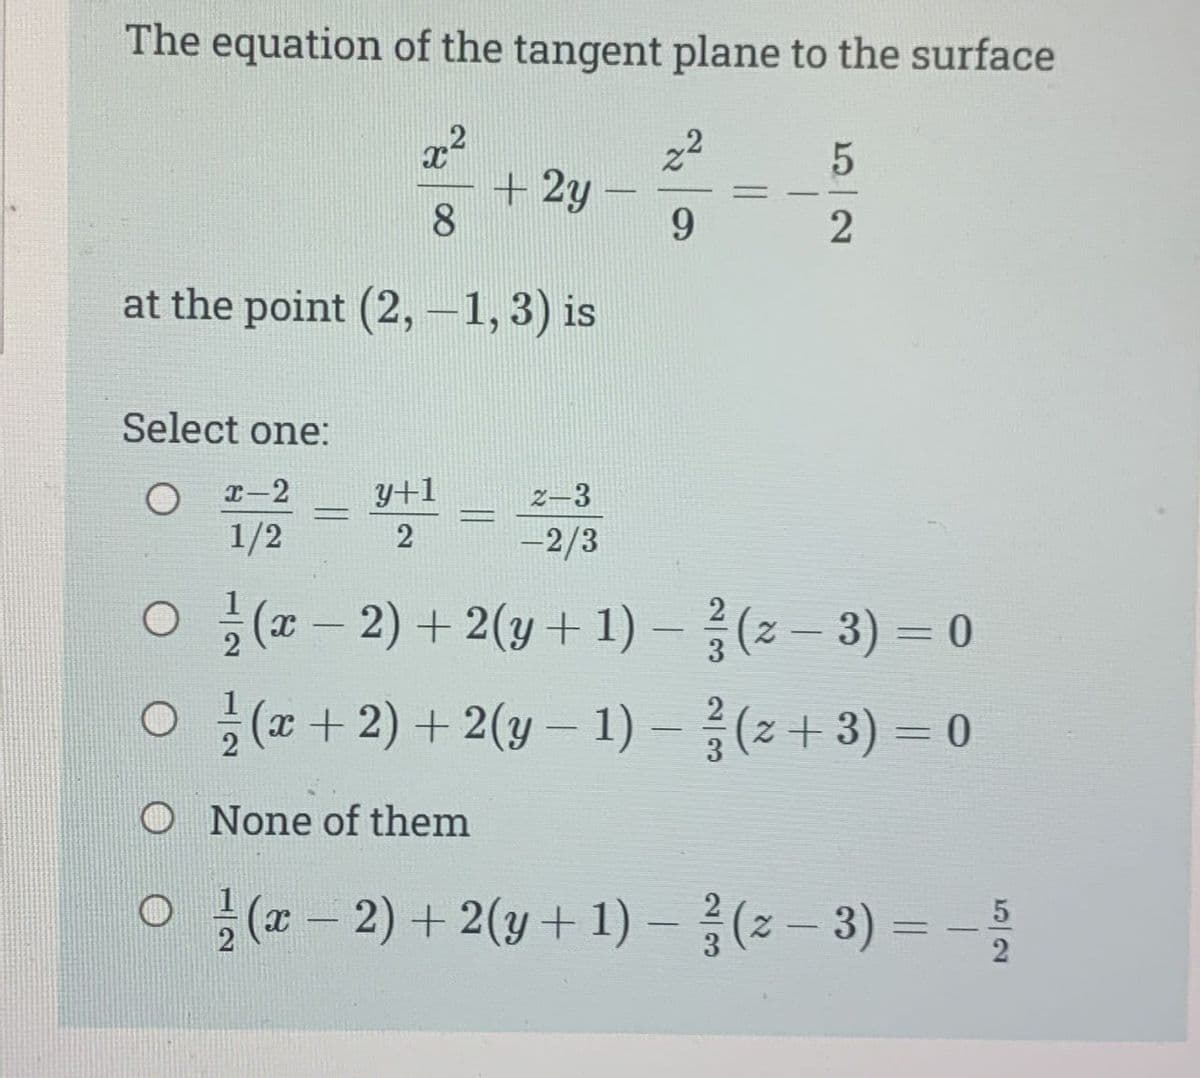 The equation of the tangent plane to the surface
x²
8
at the point (2,-1, 3) is
=
y+1
2
+ 2y
FRAN
9
Select one:
x-2
2-3
1/2
-2/3
O(x-2) + 2(y + 1)-(2-3) = 0
=
5
2
2
O(x + 2) + 2(y - 1) − (z + 3) = 0
-
3
O None of them
○ ½(x − 2) + 2(y + 1) − ² (z − 3) = − 5
-